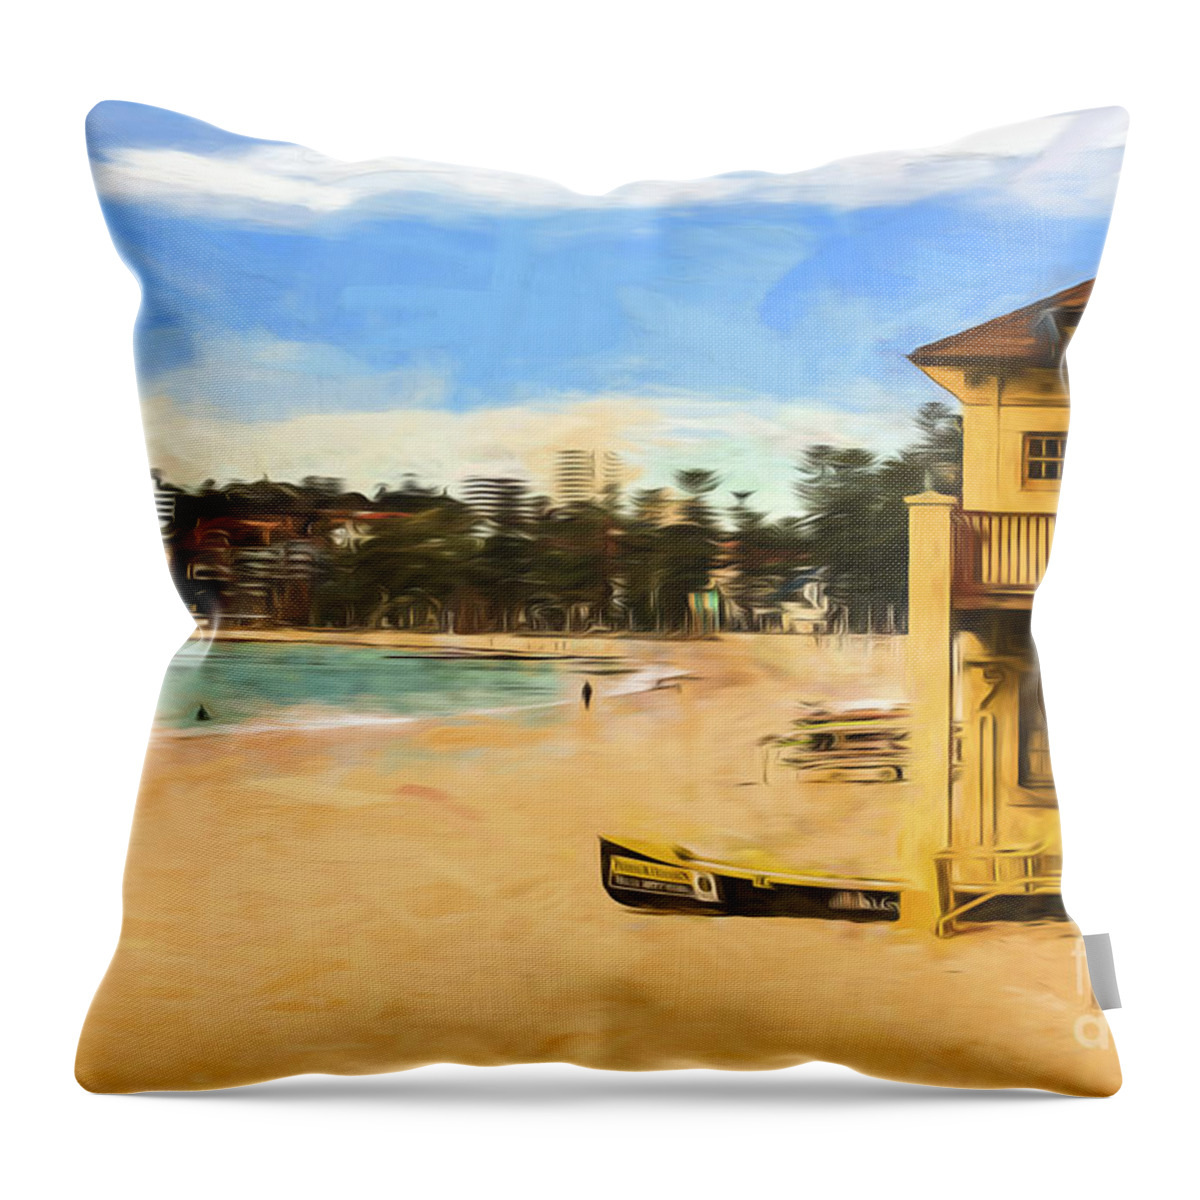 People Throw Pillow featuring the photograph Manly Beach by Sheila Smart Fine Art Photography